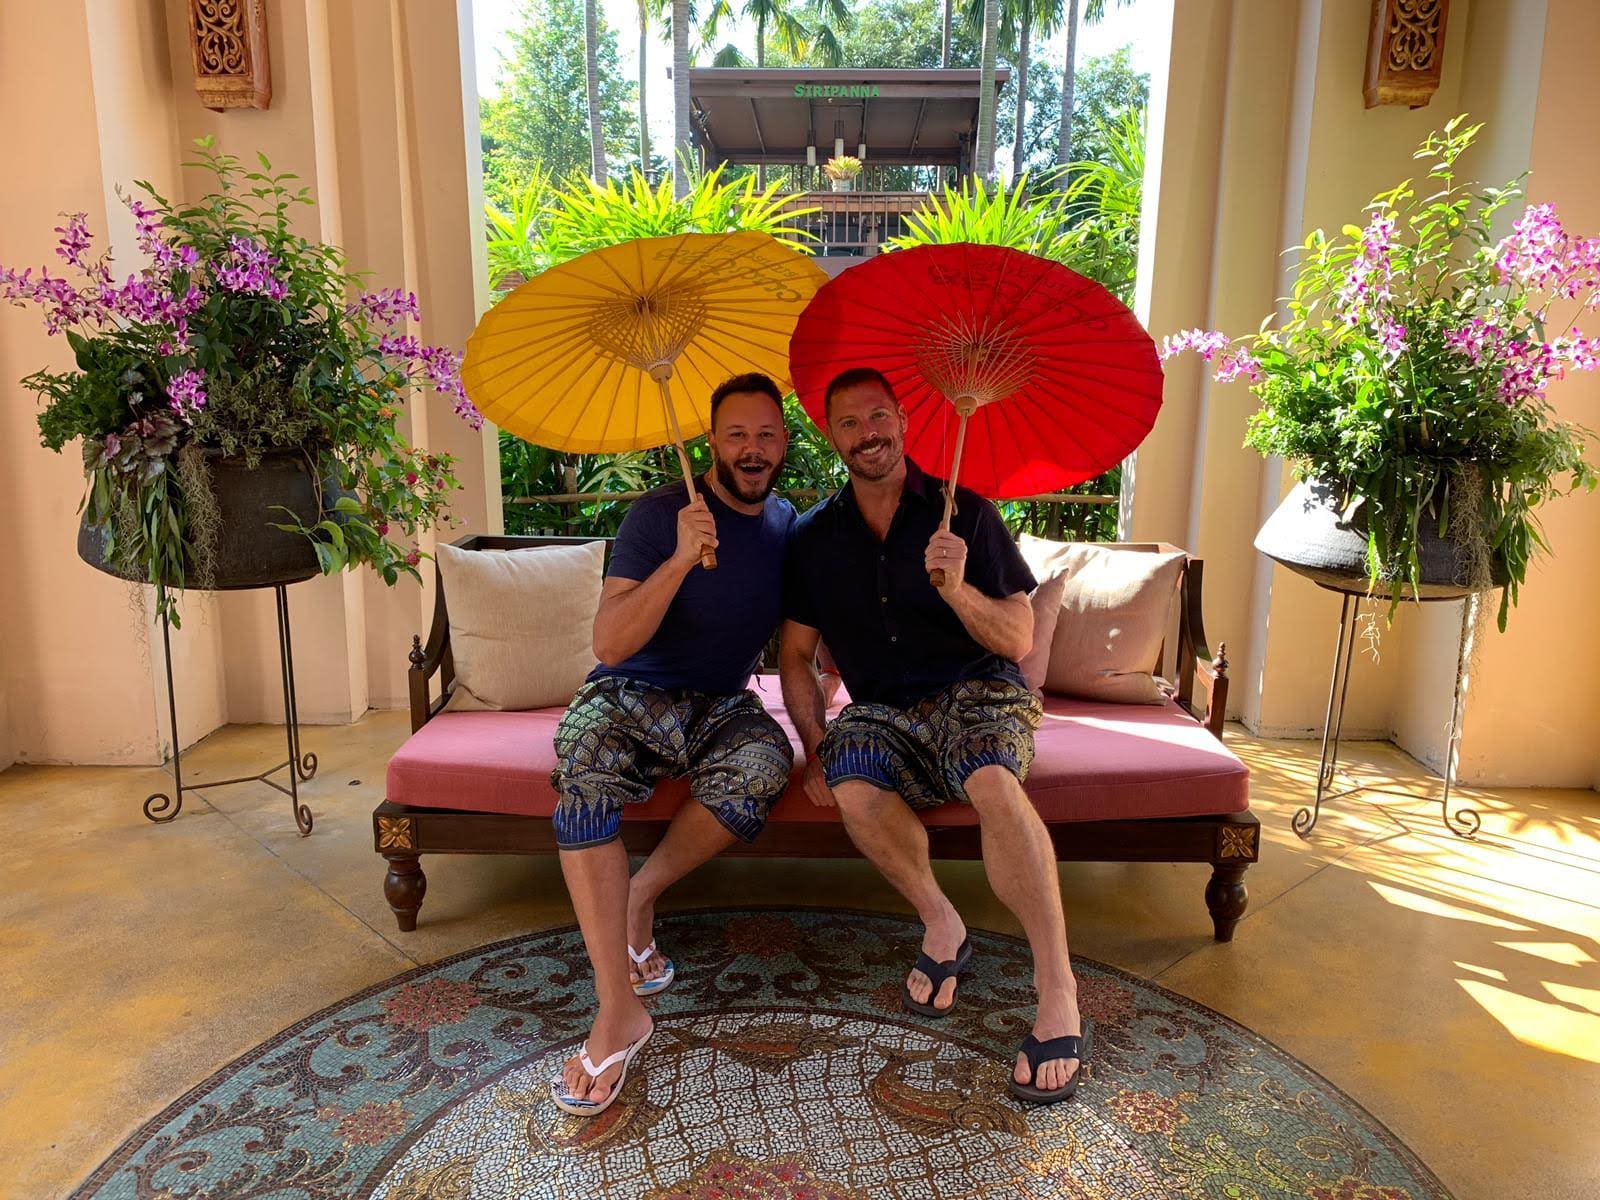 Two gay travellers in Thailand wearing traditional clothes and holding umbrellas.